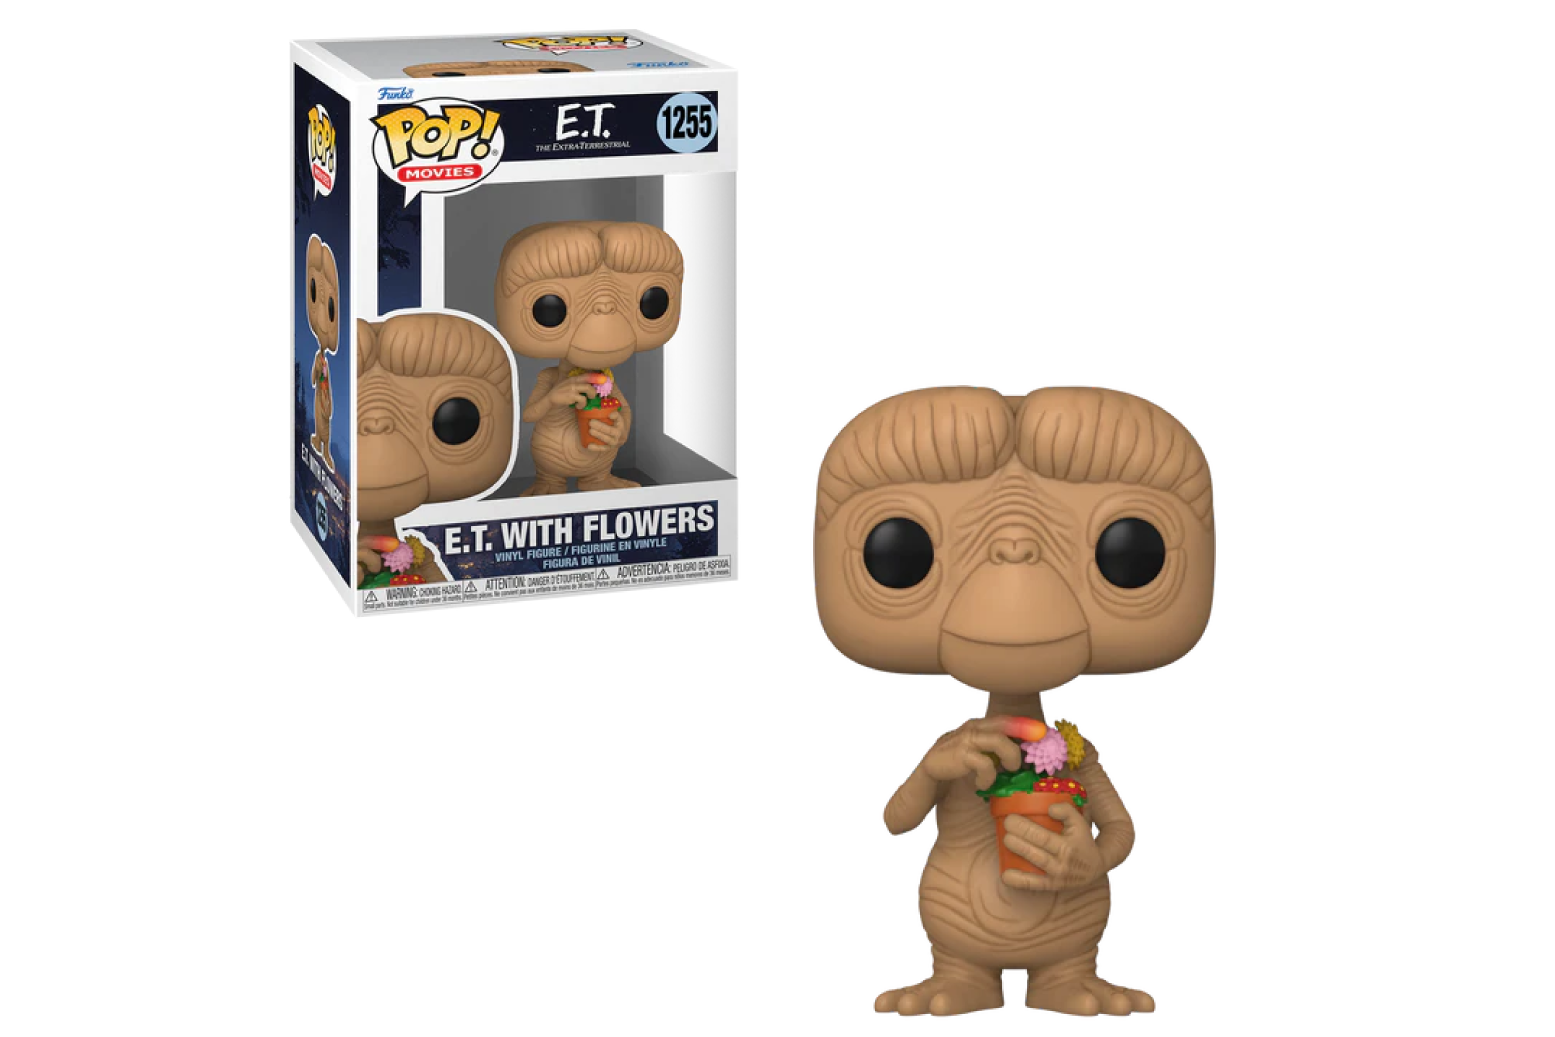 POP! Movies: E.T. The Extraterrestrial - E.T. With Flowers